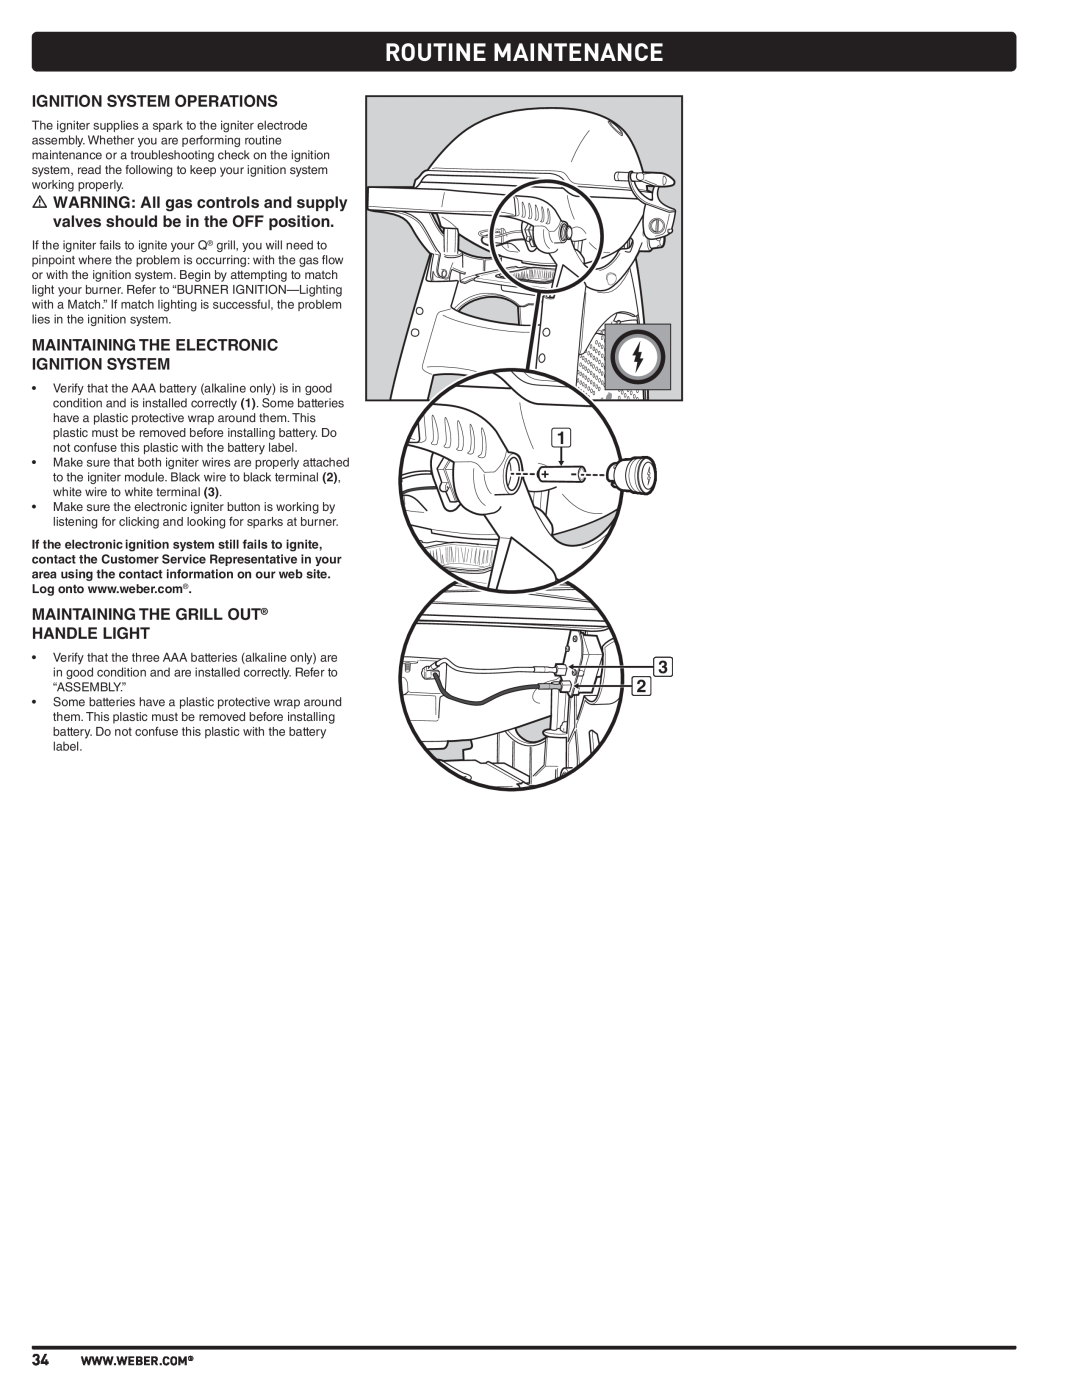 Weber 57515 manual Routine Maintenance, Ignition System Operations, Maintaining The Electronic Ignition System 